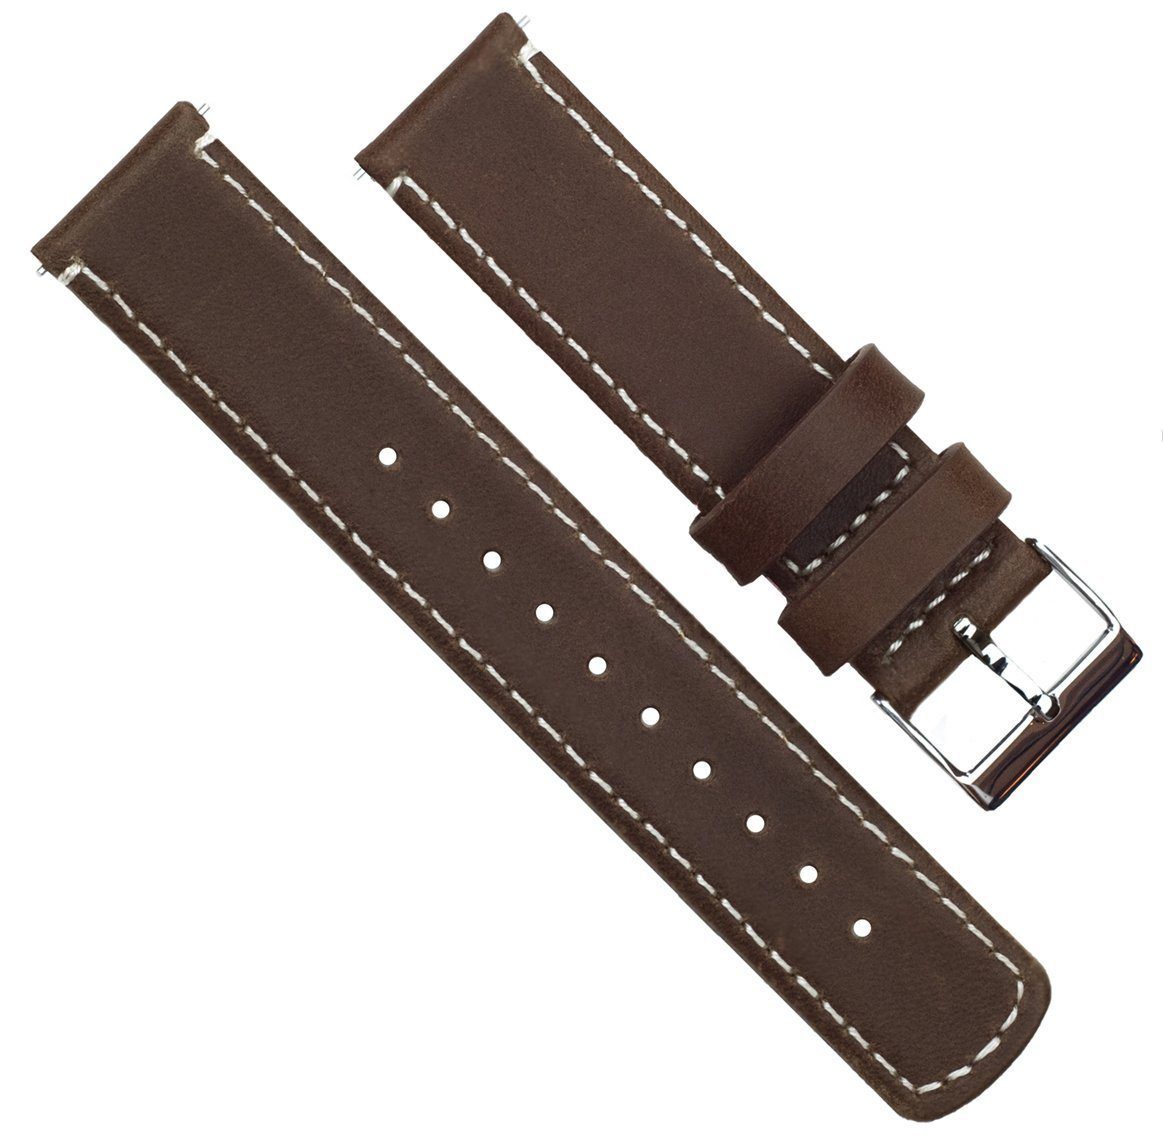 Gear Sport | Saddle Leather & Linen White Stitching - Barton Watch Bands